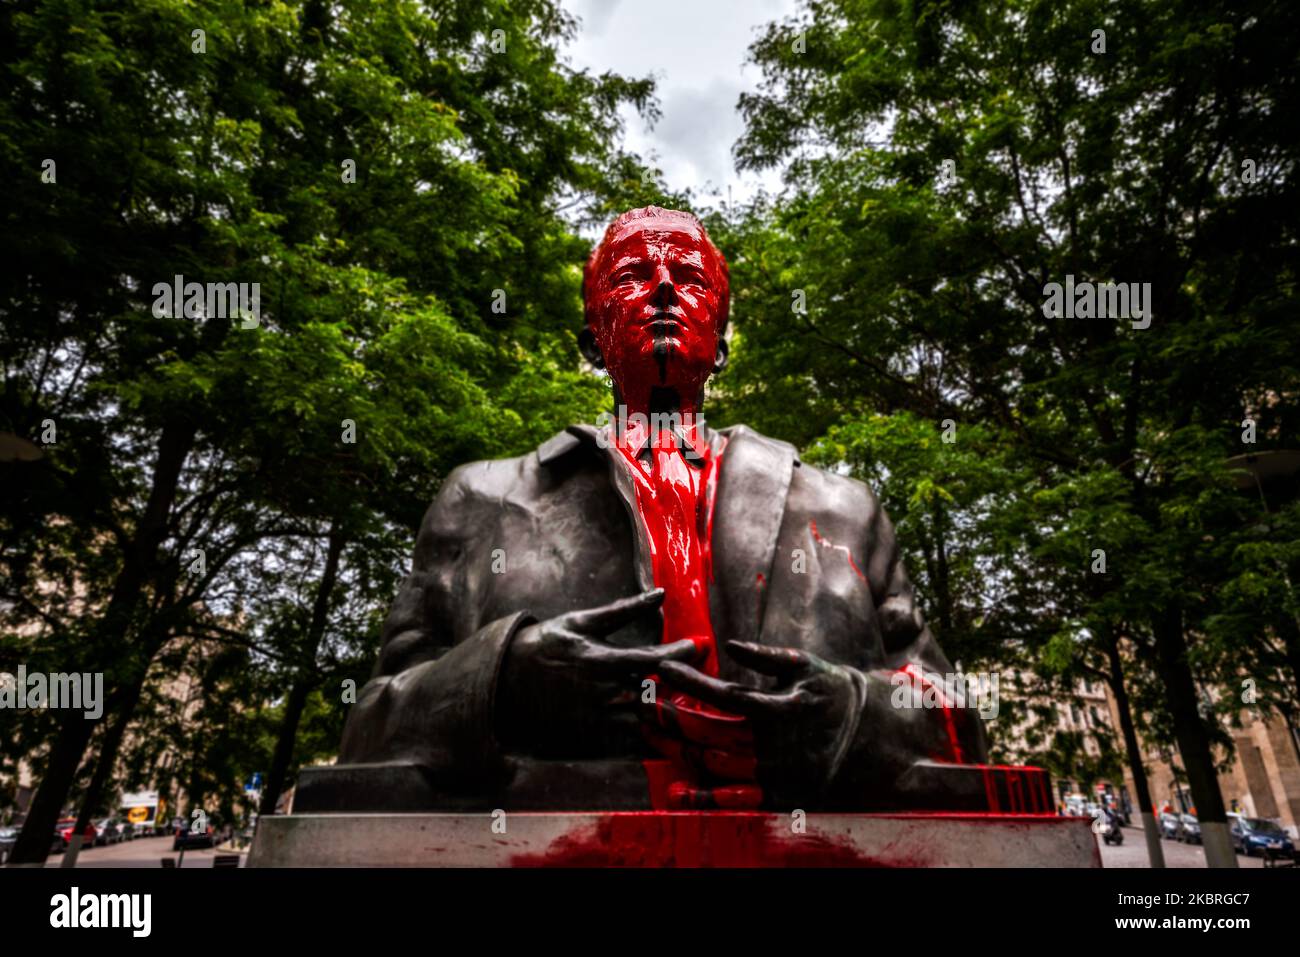 Vandalized statue of King of Belgium Boudewijn in Brussels - Belgium on 22 June 2020. He was the last Belgian king to be sovereign of the Congo, in 1960, King Boudewijn declared the Belgian colony of Congo independent. Protest and demonstrations against racism have been raging worldwide since the death of American George Floyd. Due to the increasing awareness of colonialism in Belgium municipalities and mayors will decide what to do with King Leopold II statues and names related to colonial Congo. (Photo by Jonathan Raa/NurPhoto) Stock Photo